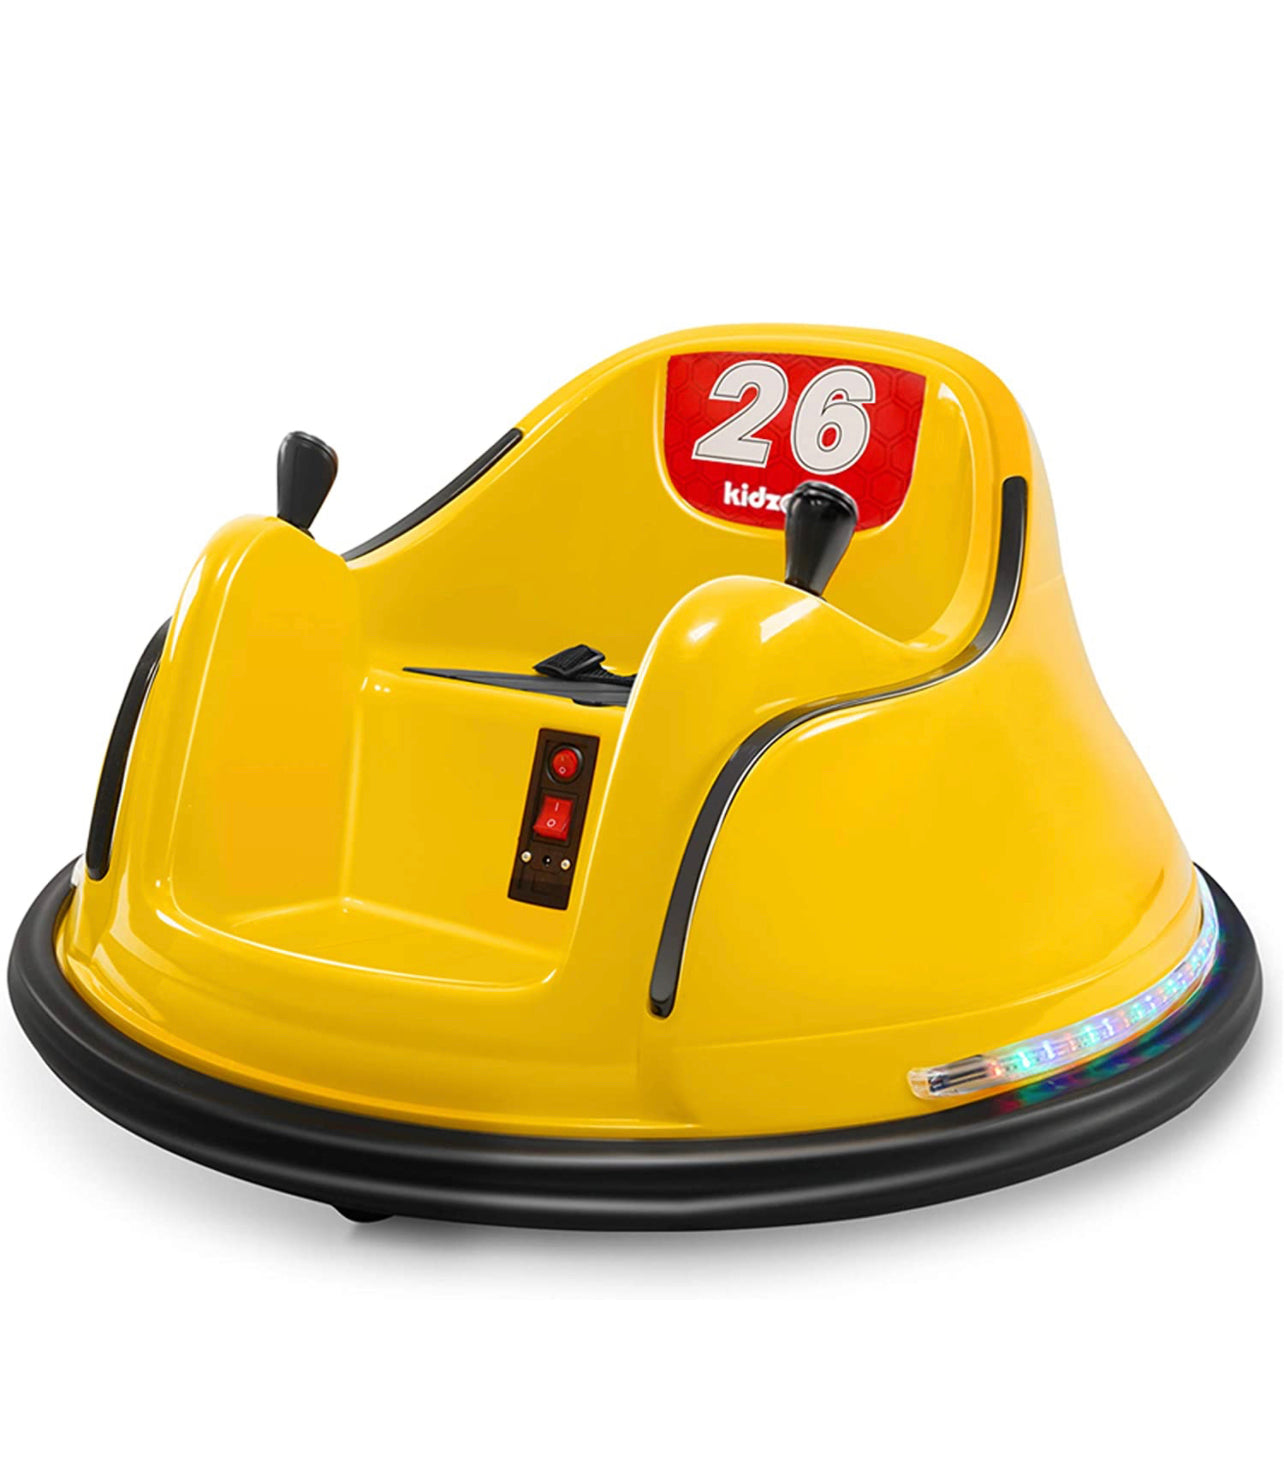 Toy Electric Ride On Bumper Car